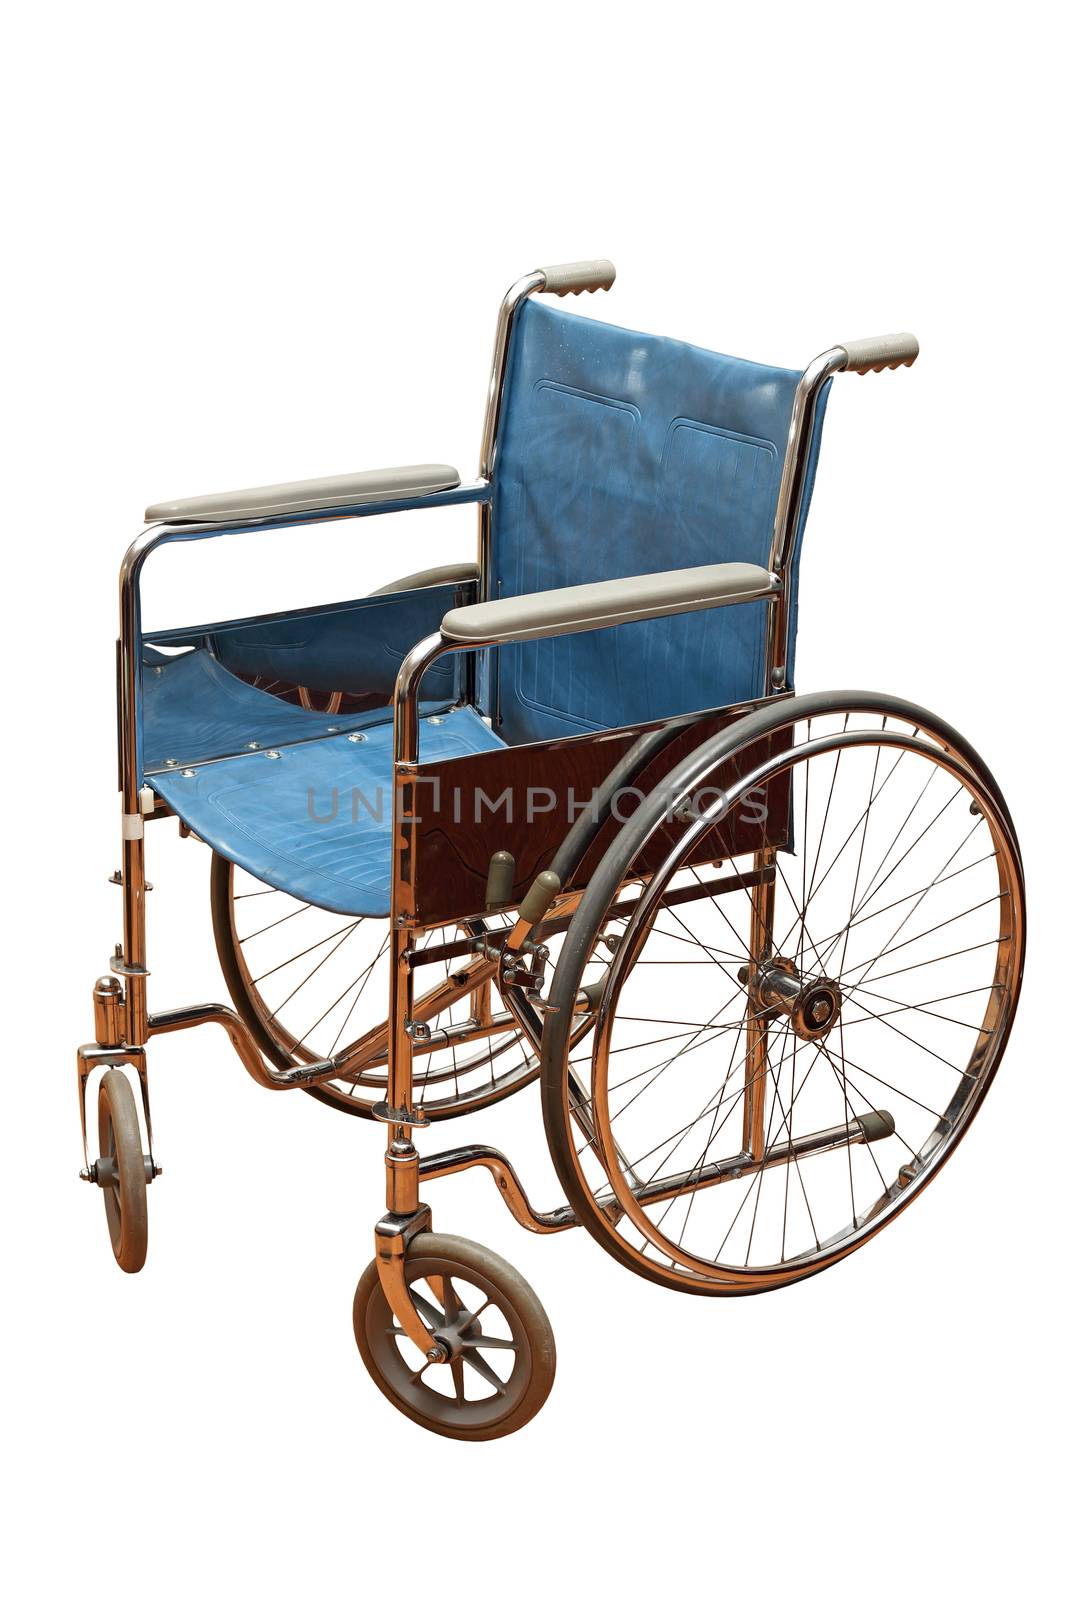 old wheel chair by taviphoto